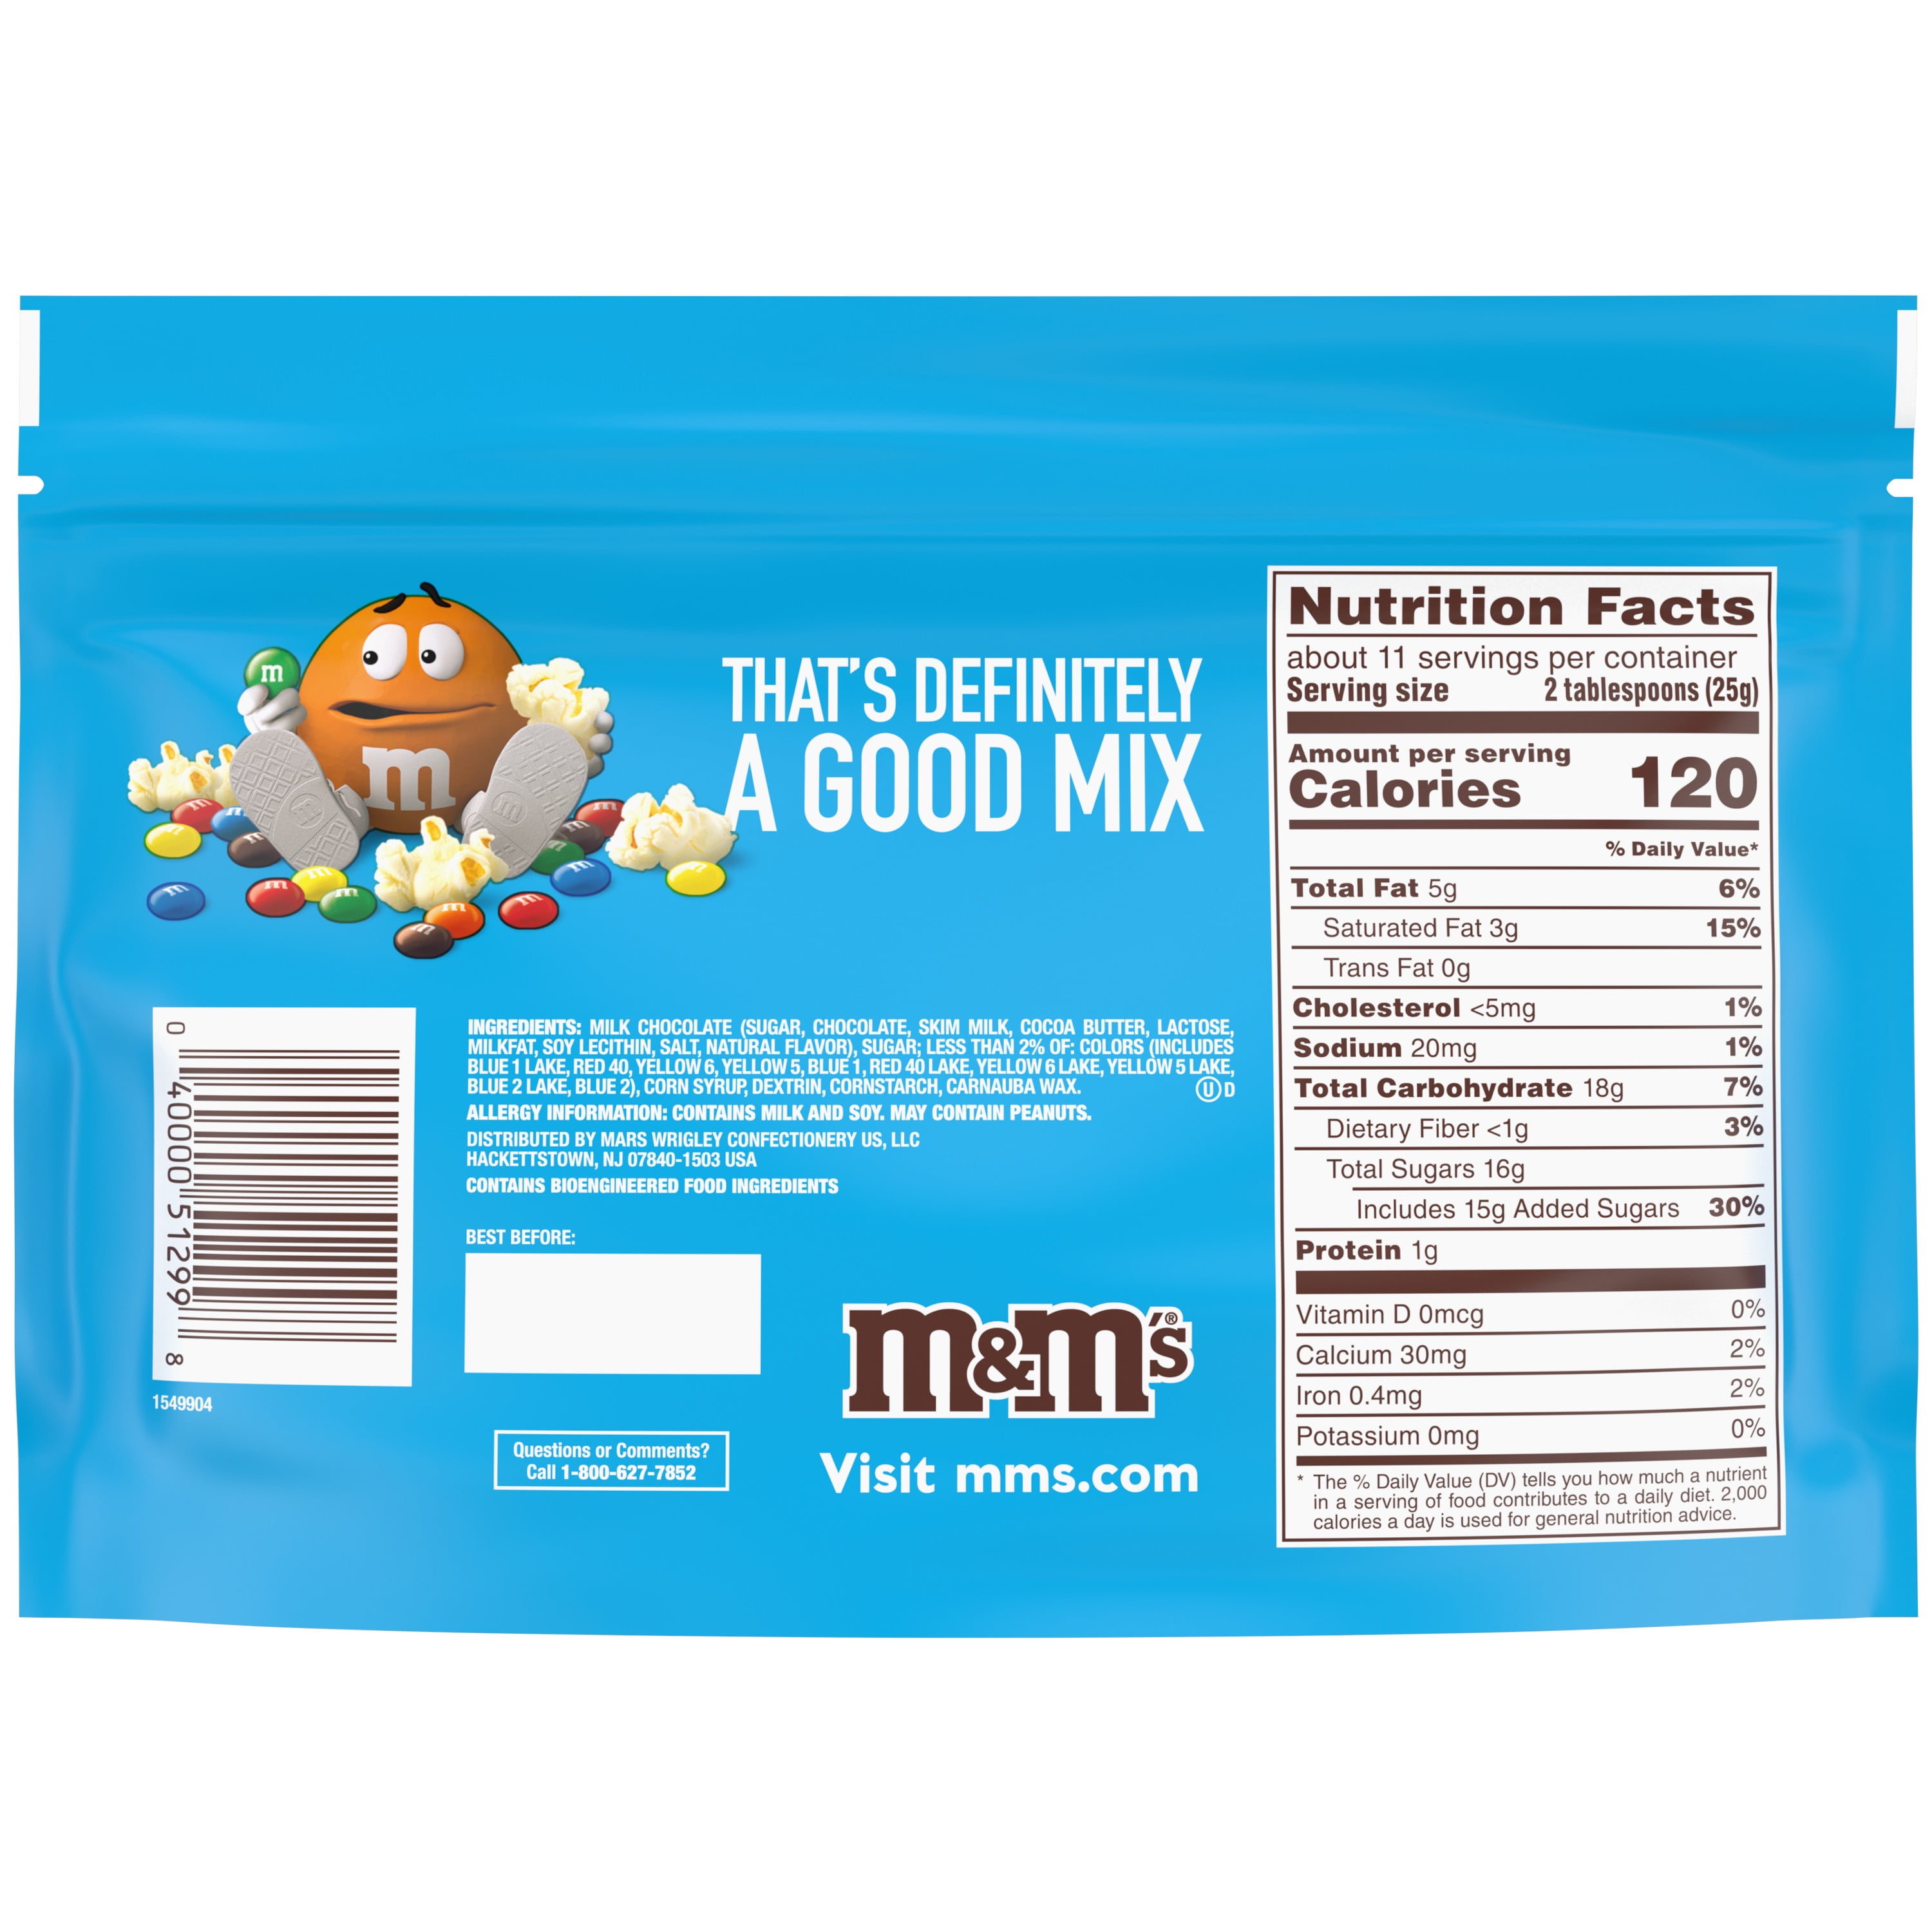  M&M'S Milk Chocolate MINIS Candy Sharing Size 10.1-Ounce Bag  (Pack of 8) : Grocery & Gourmet Food